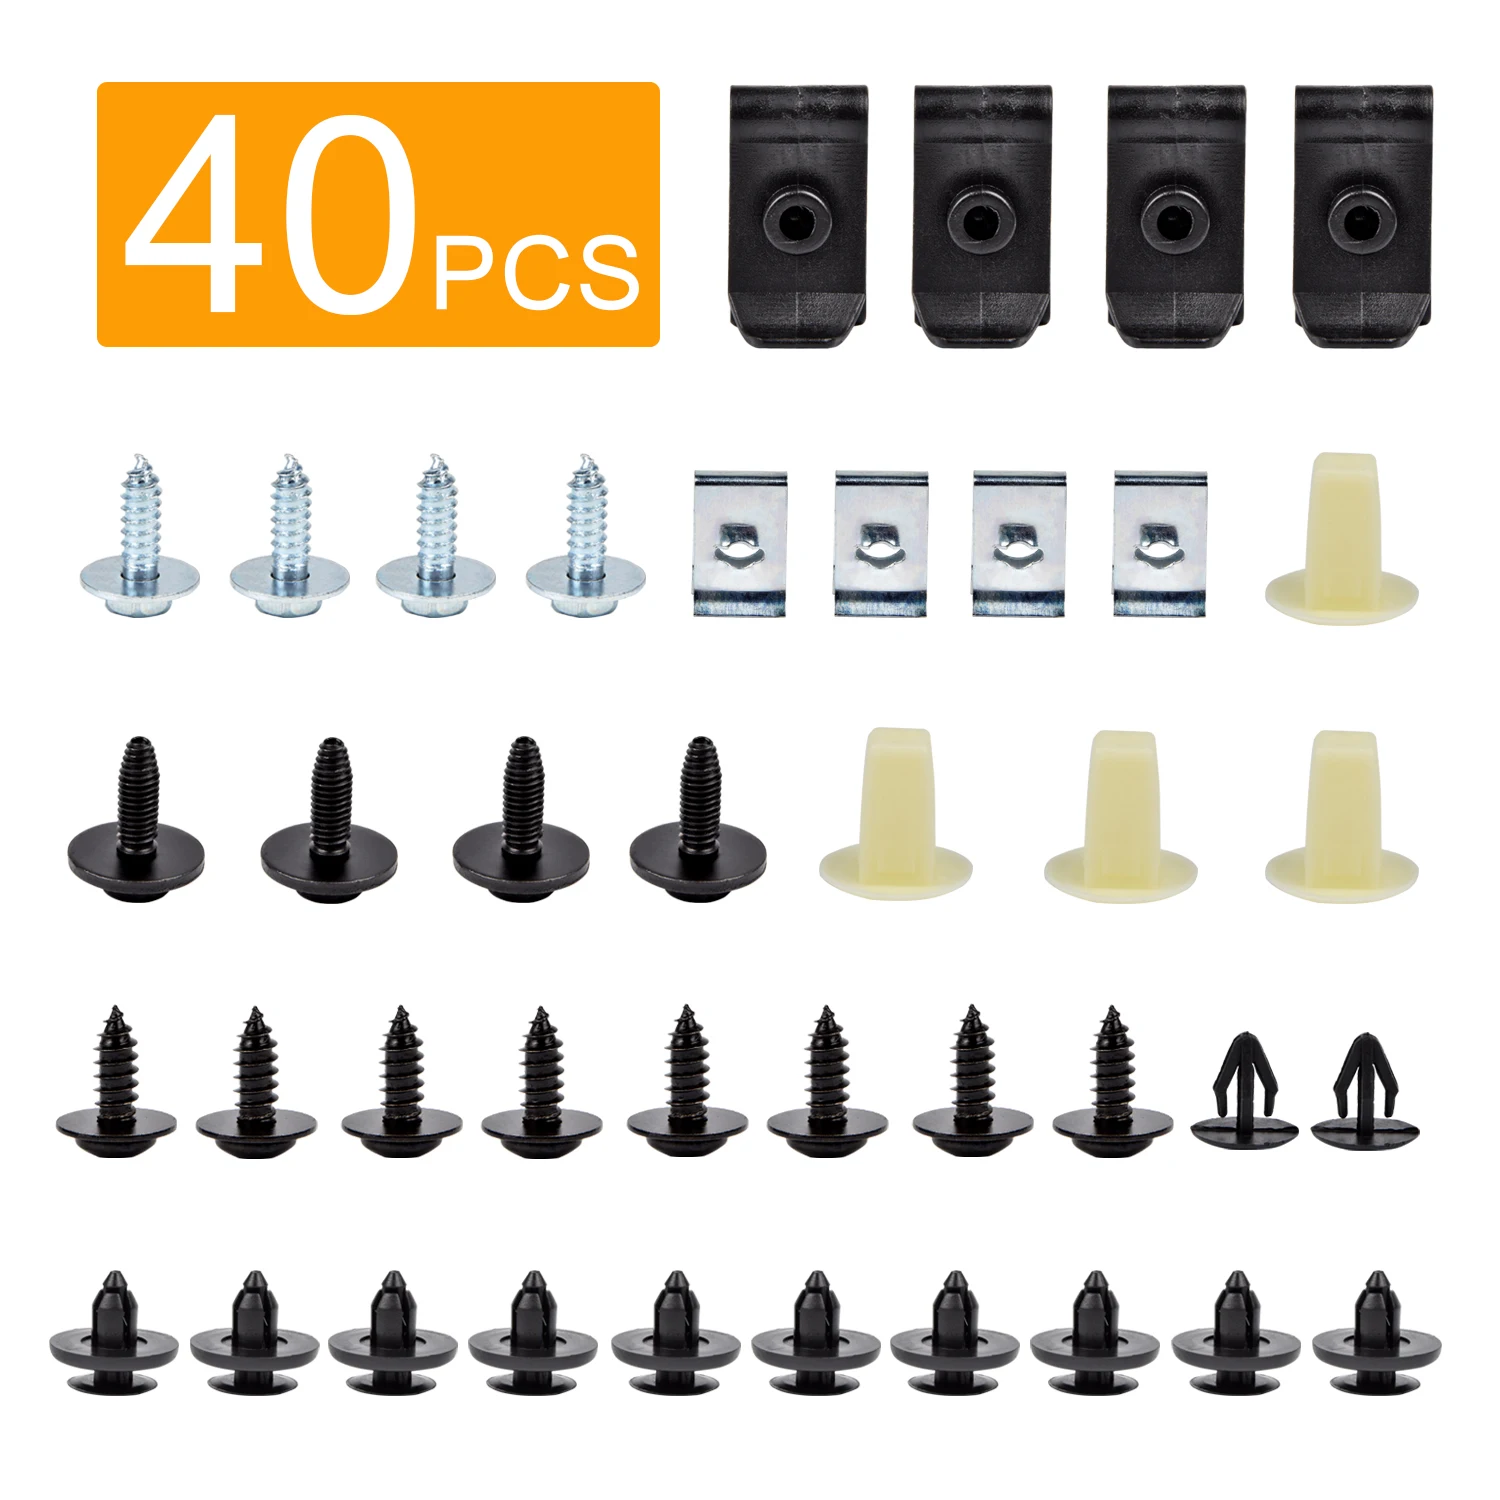 

40pcs Car Tuning Engine Undertray Cover Clips Bottom Shield Guard Screws For TOYOTA/AVENSIS Car Accessories